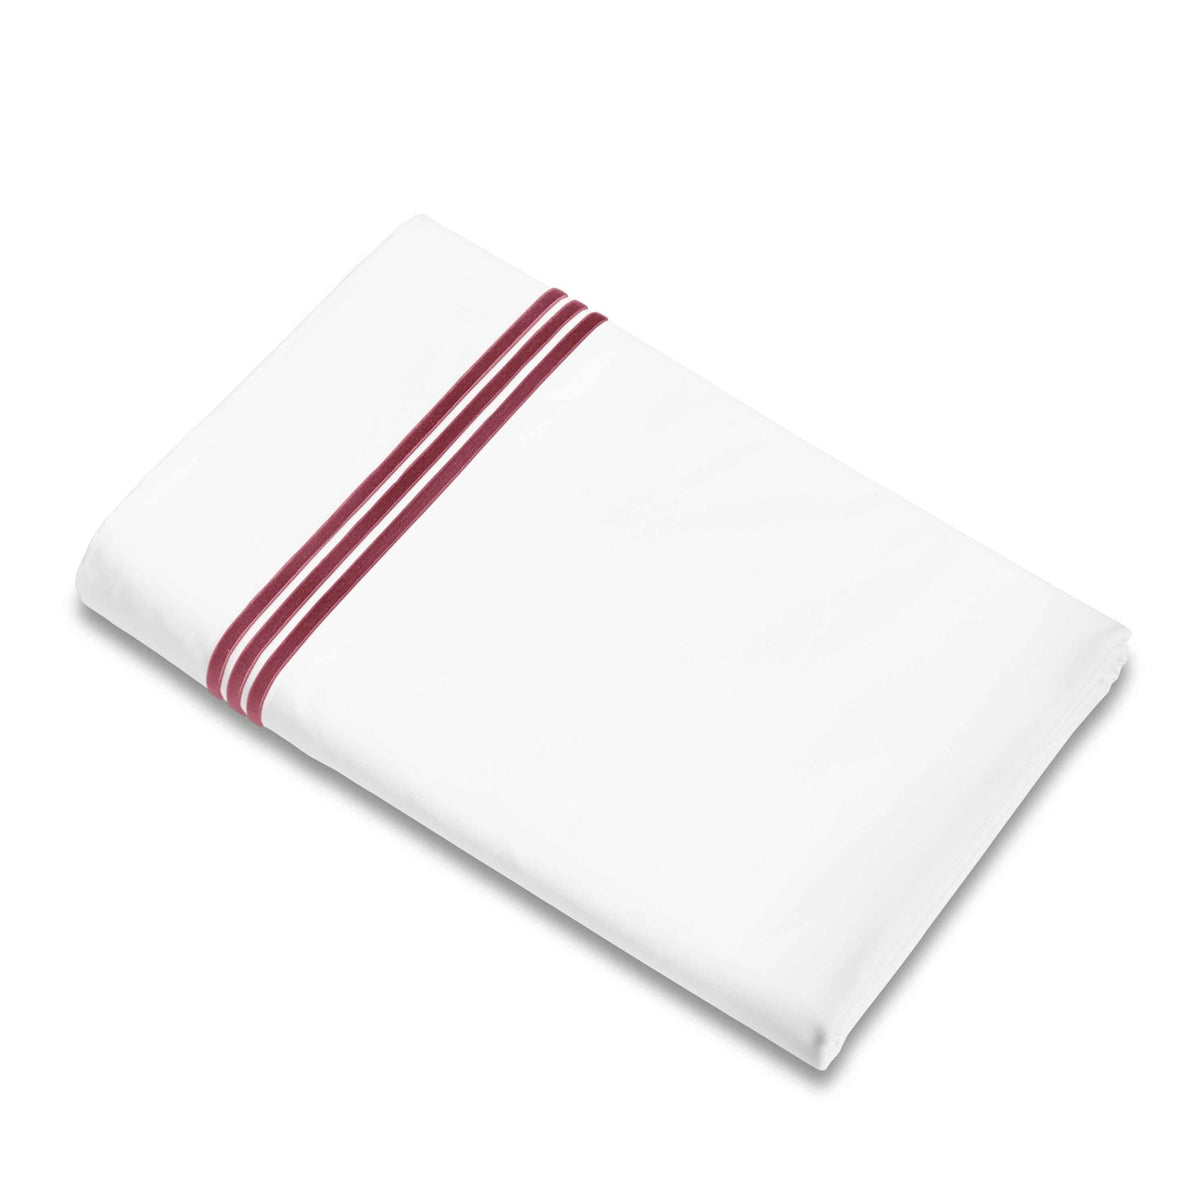 Flat Sheet of Signoria Platinum Percale Bedding in White/Cardinale Red Color